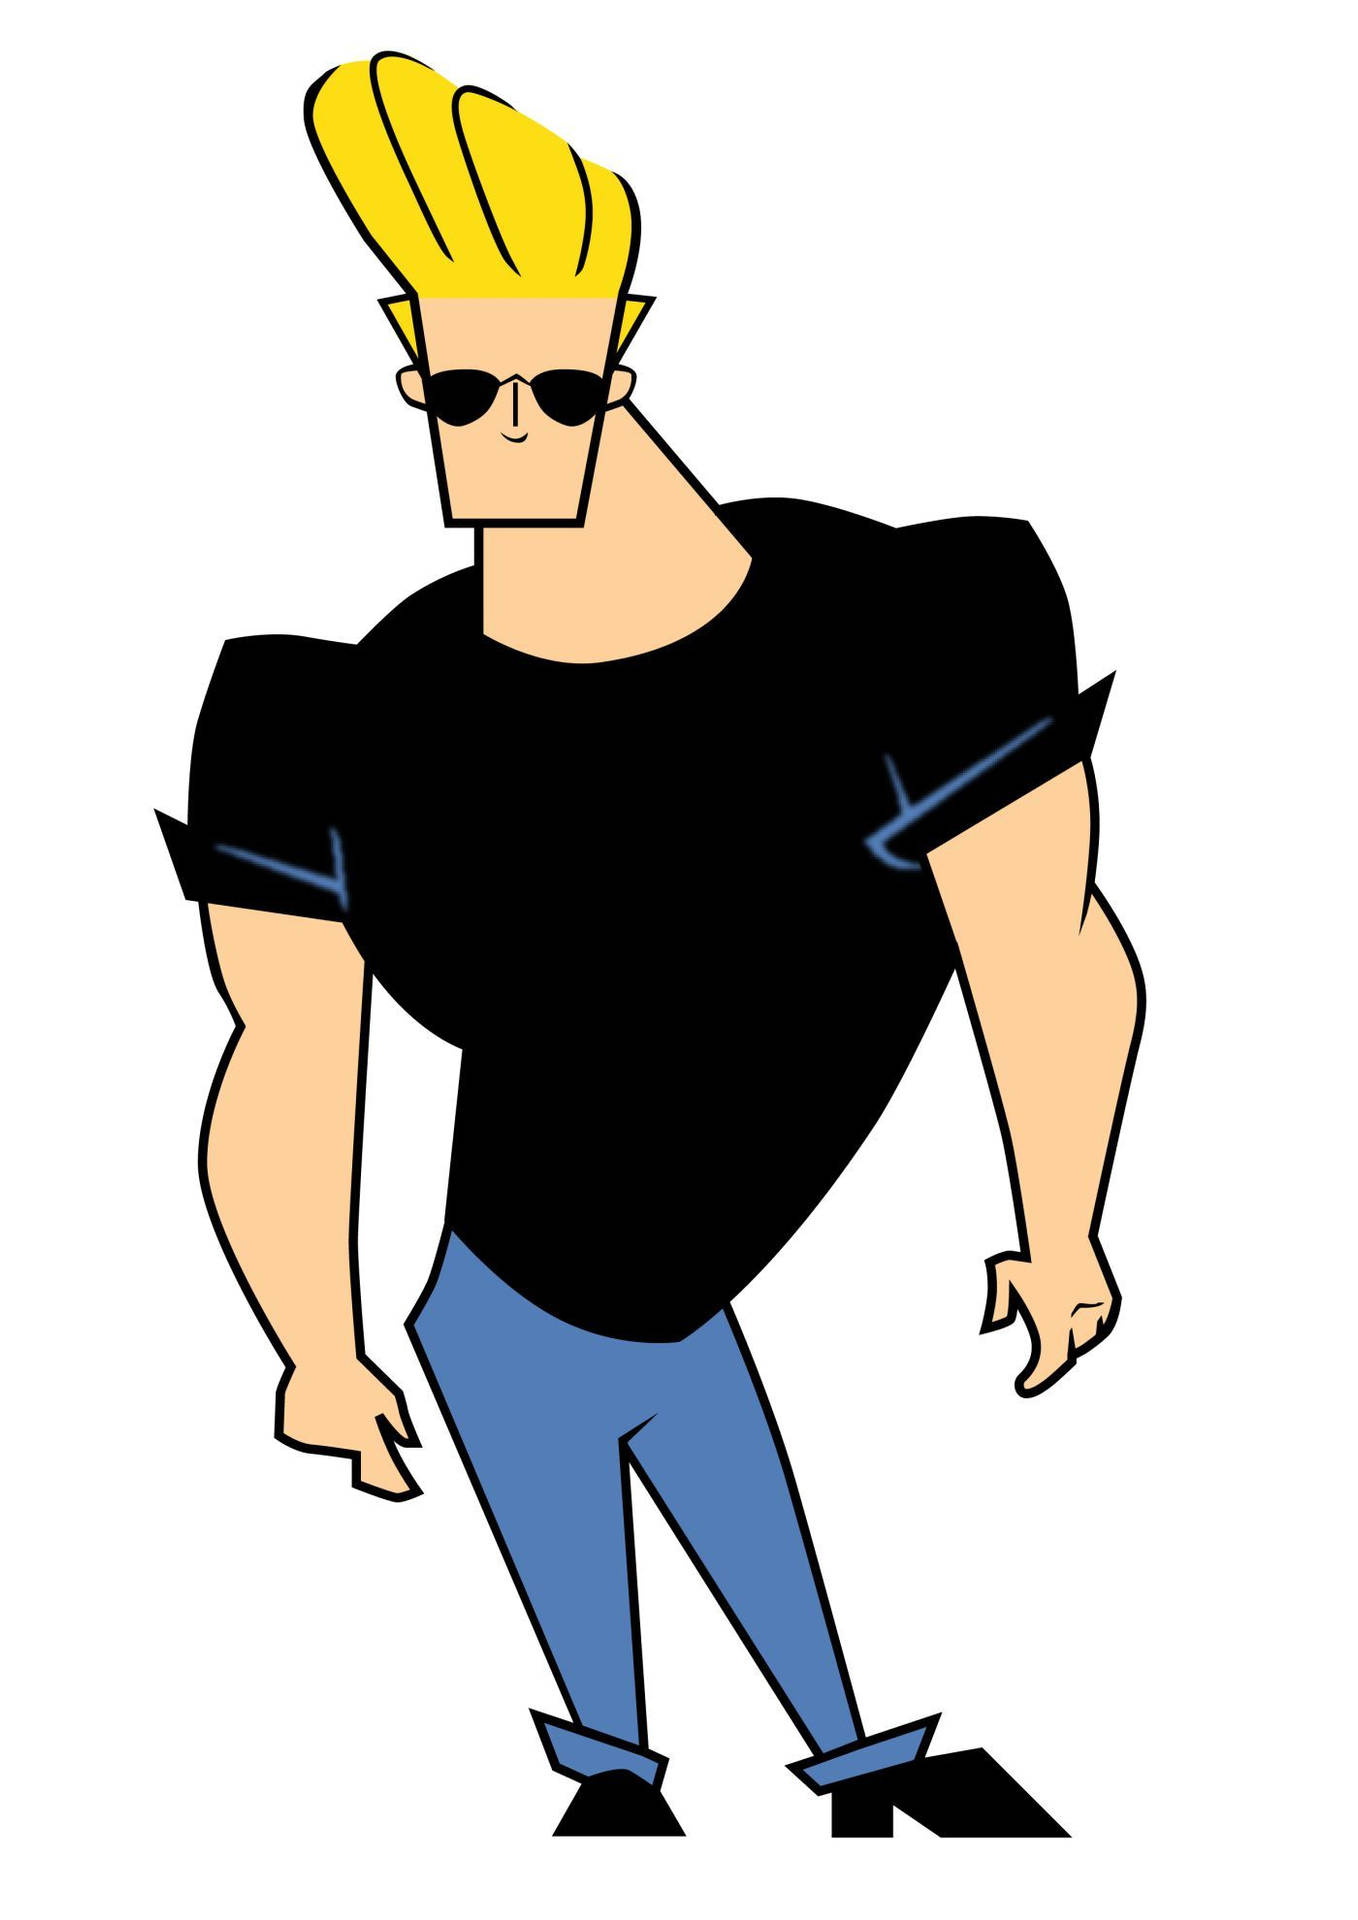 Cool Johnny Bravo Flexing Muscles Background